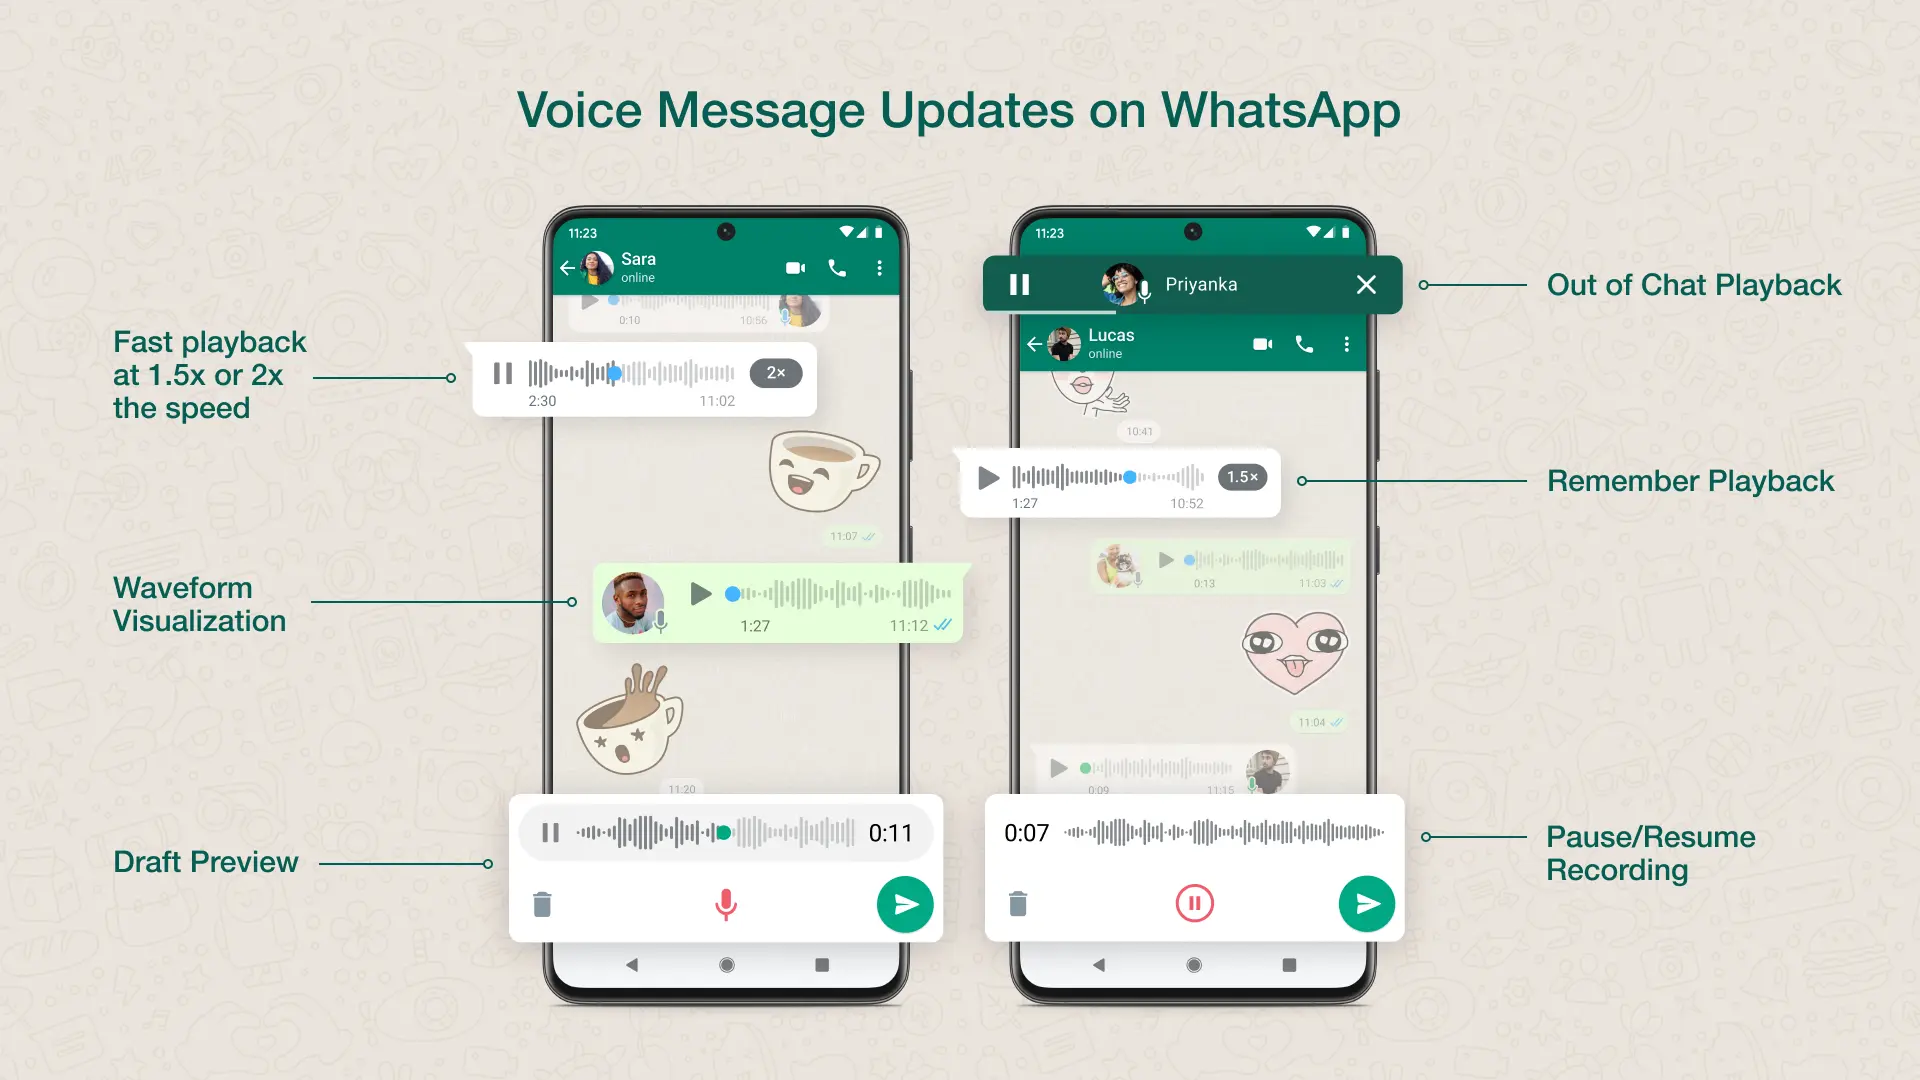 Marketing image showcasing five new features for WhatsApp voice messages: Fast playback at 1.5 and 2x the speed, waveform visualization, draft preview, out of chat playback, remembering playback position and the ability to pause and resume recording 